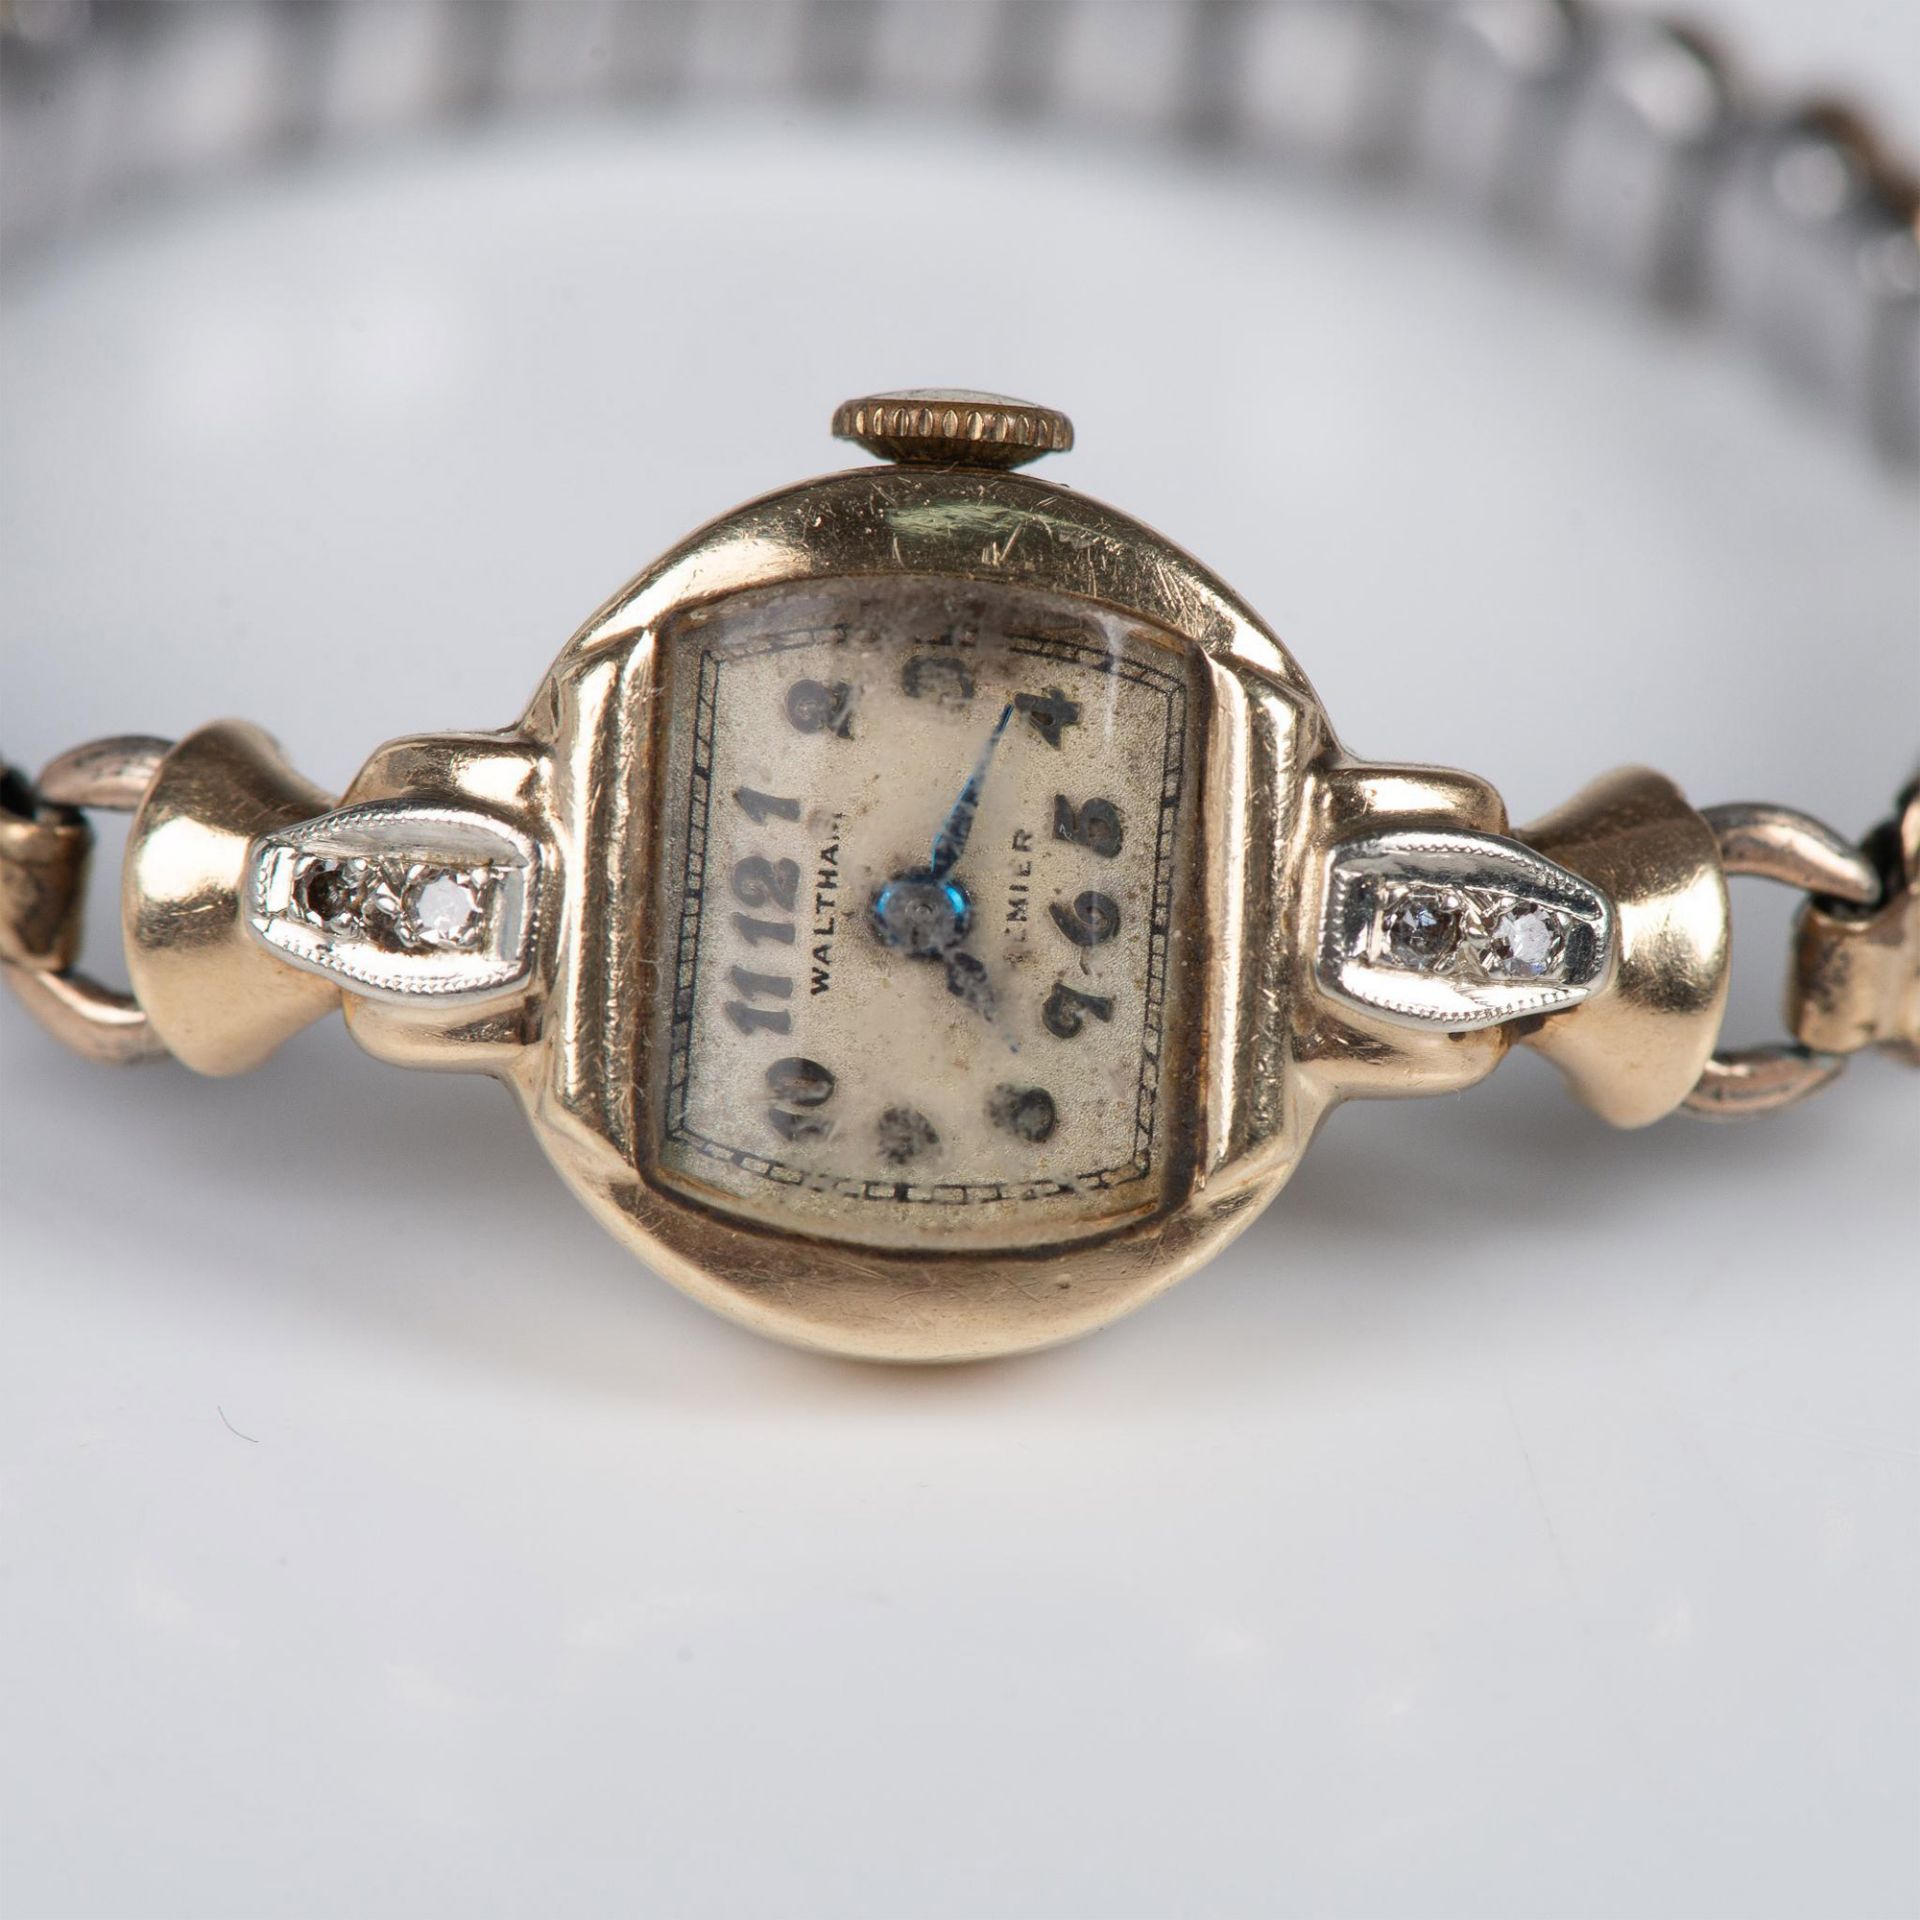 Delicate Waltham Ladies Gold and Diamond Wristwatch - Image 2 of 5